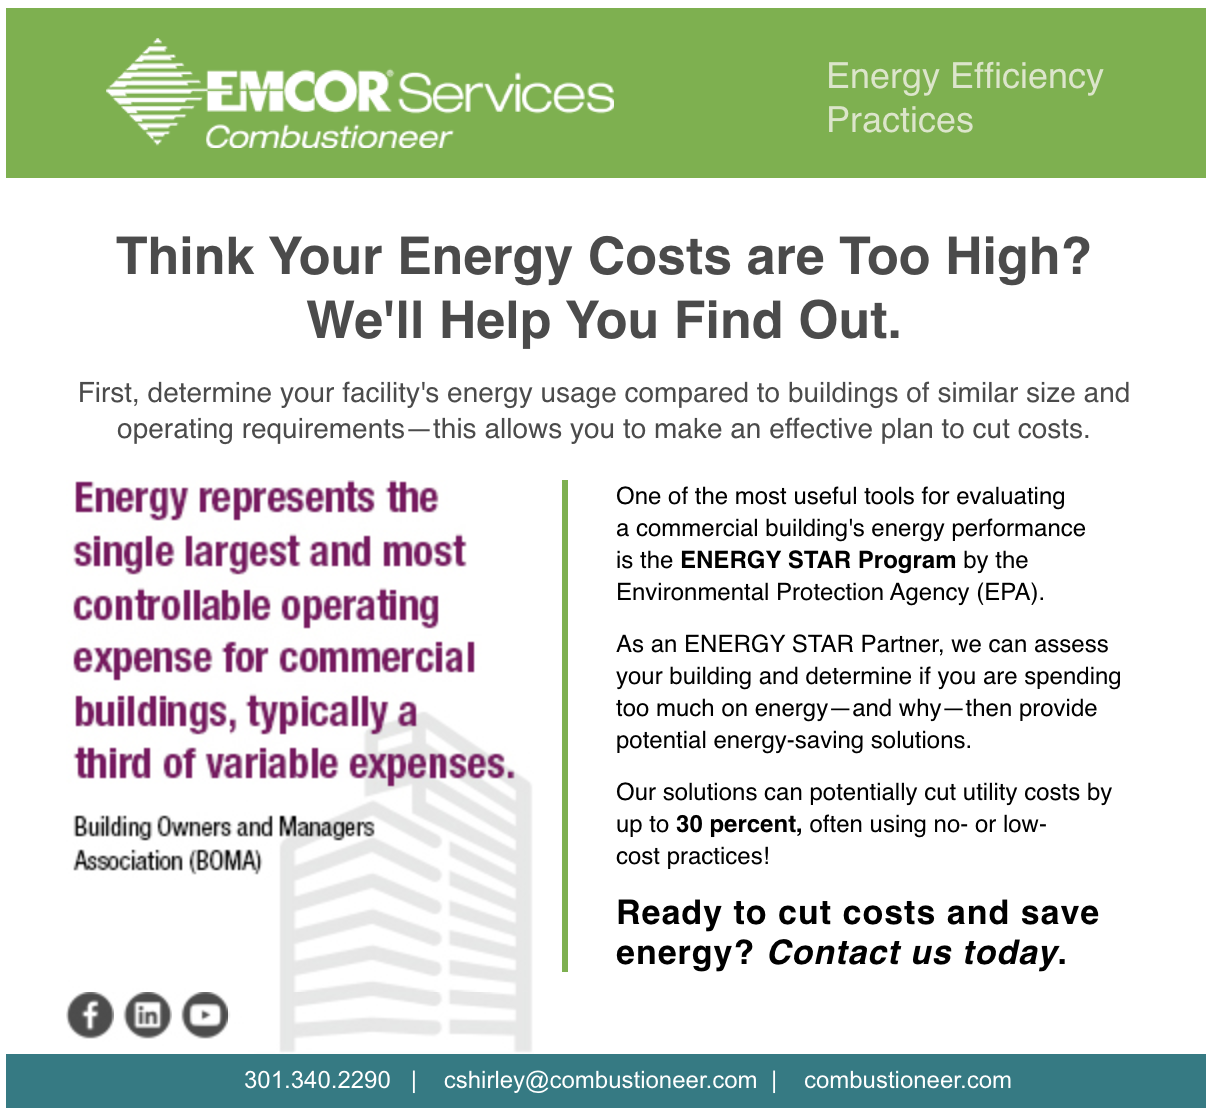 IThink Your Energy Costs are Too High? We'll Help You Find Out.